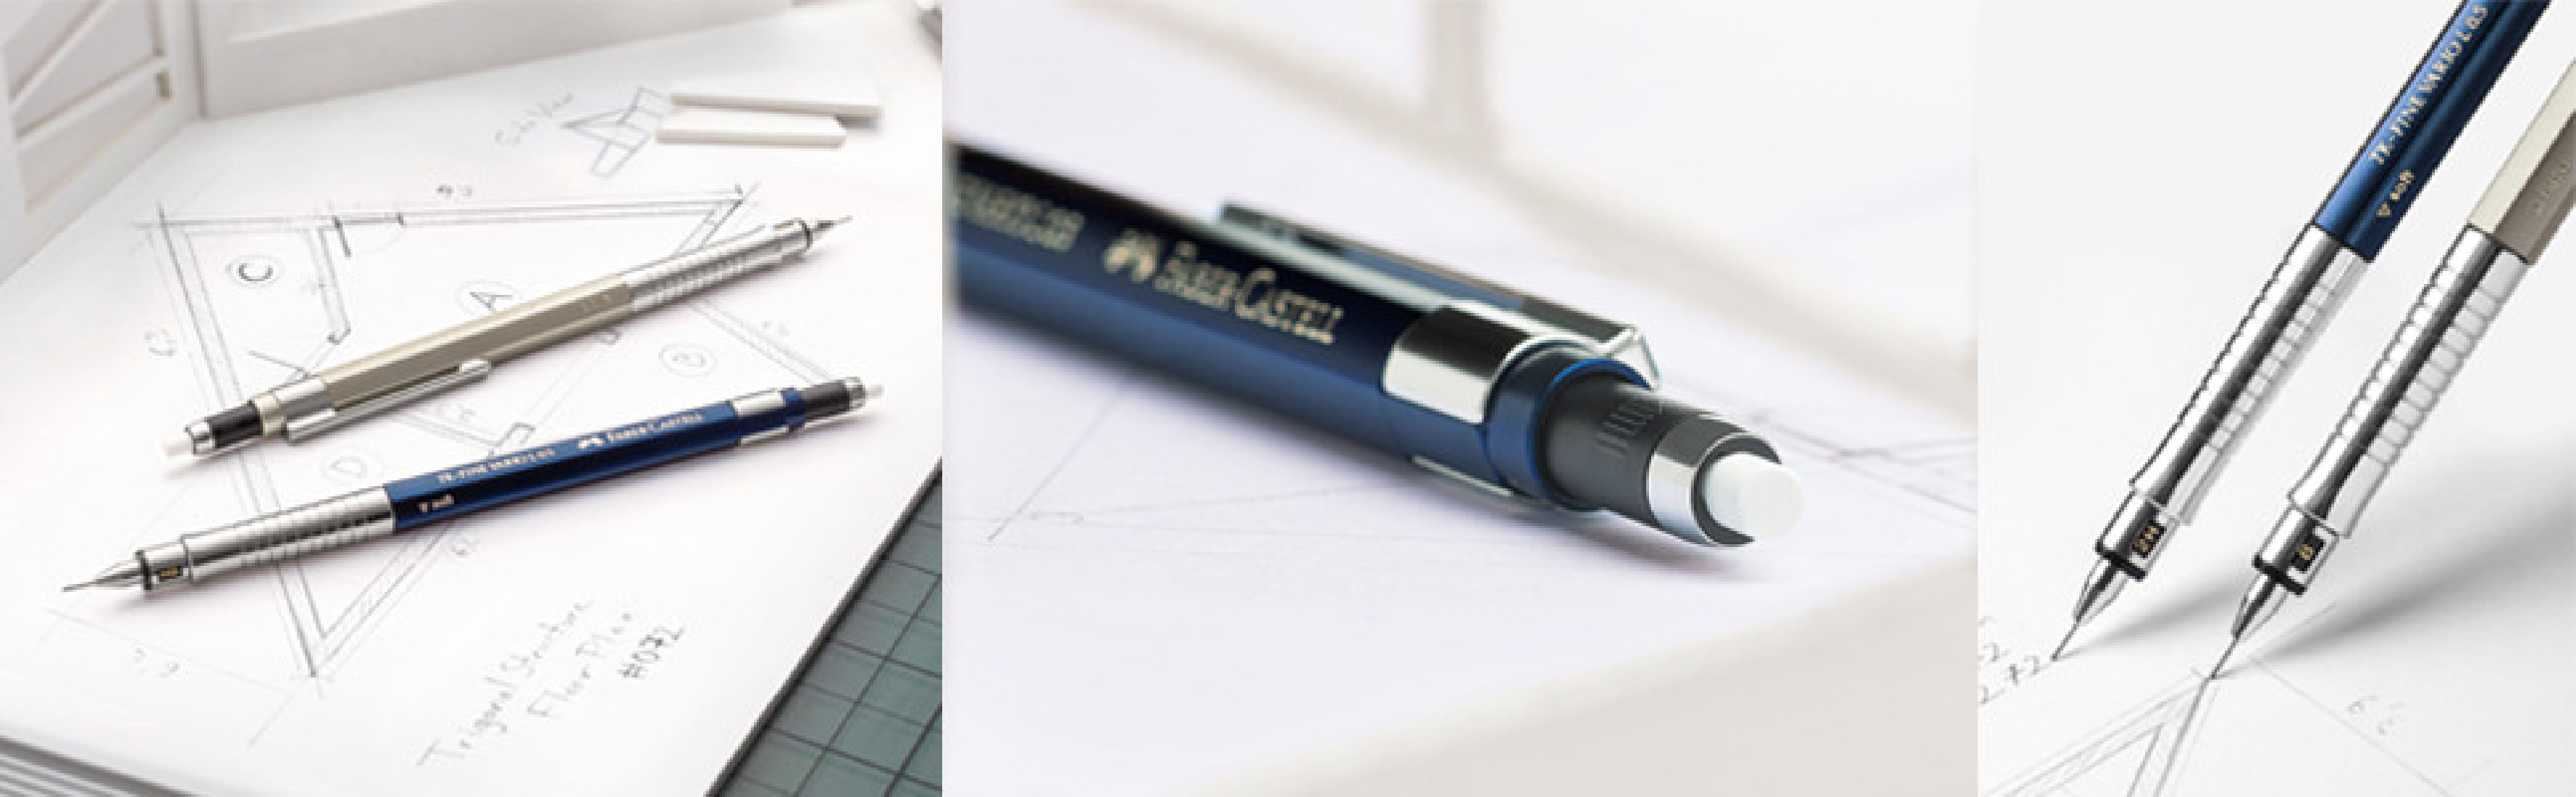 Faber-Castell TK-Fine Vario L 135740 Mechanical Pencil 0.7 mm Oro Champagne Lead Pencil with Soft/Hard Mechanism